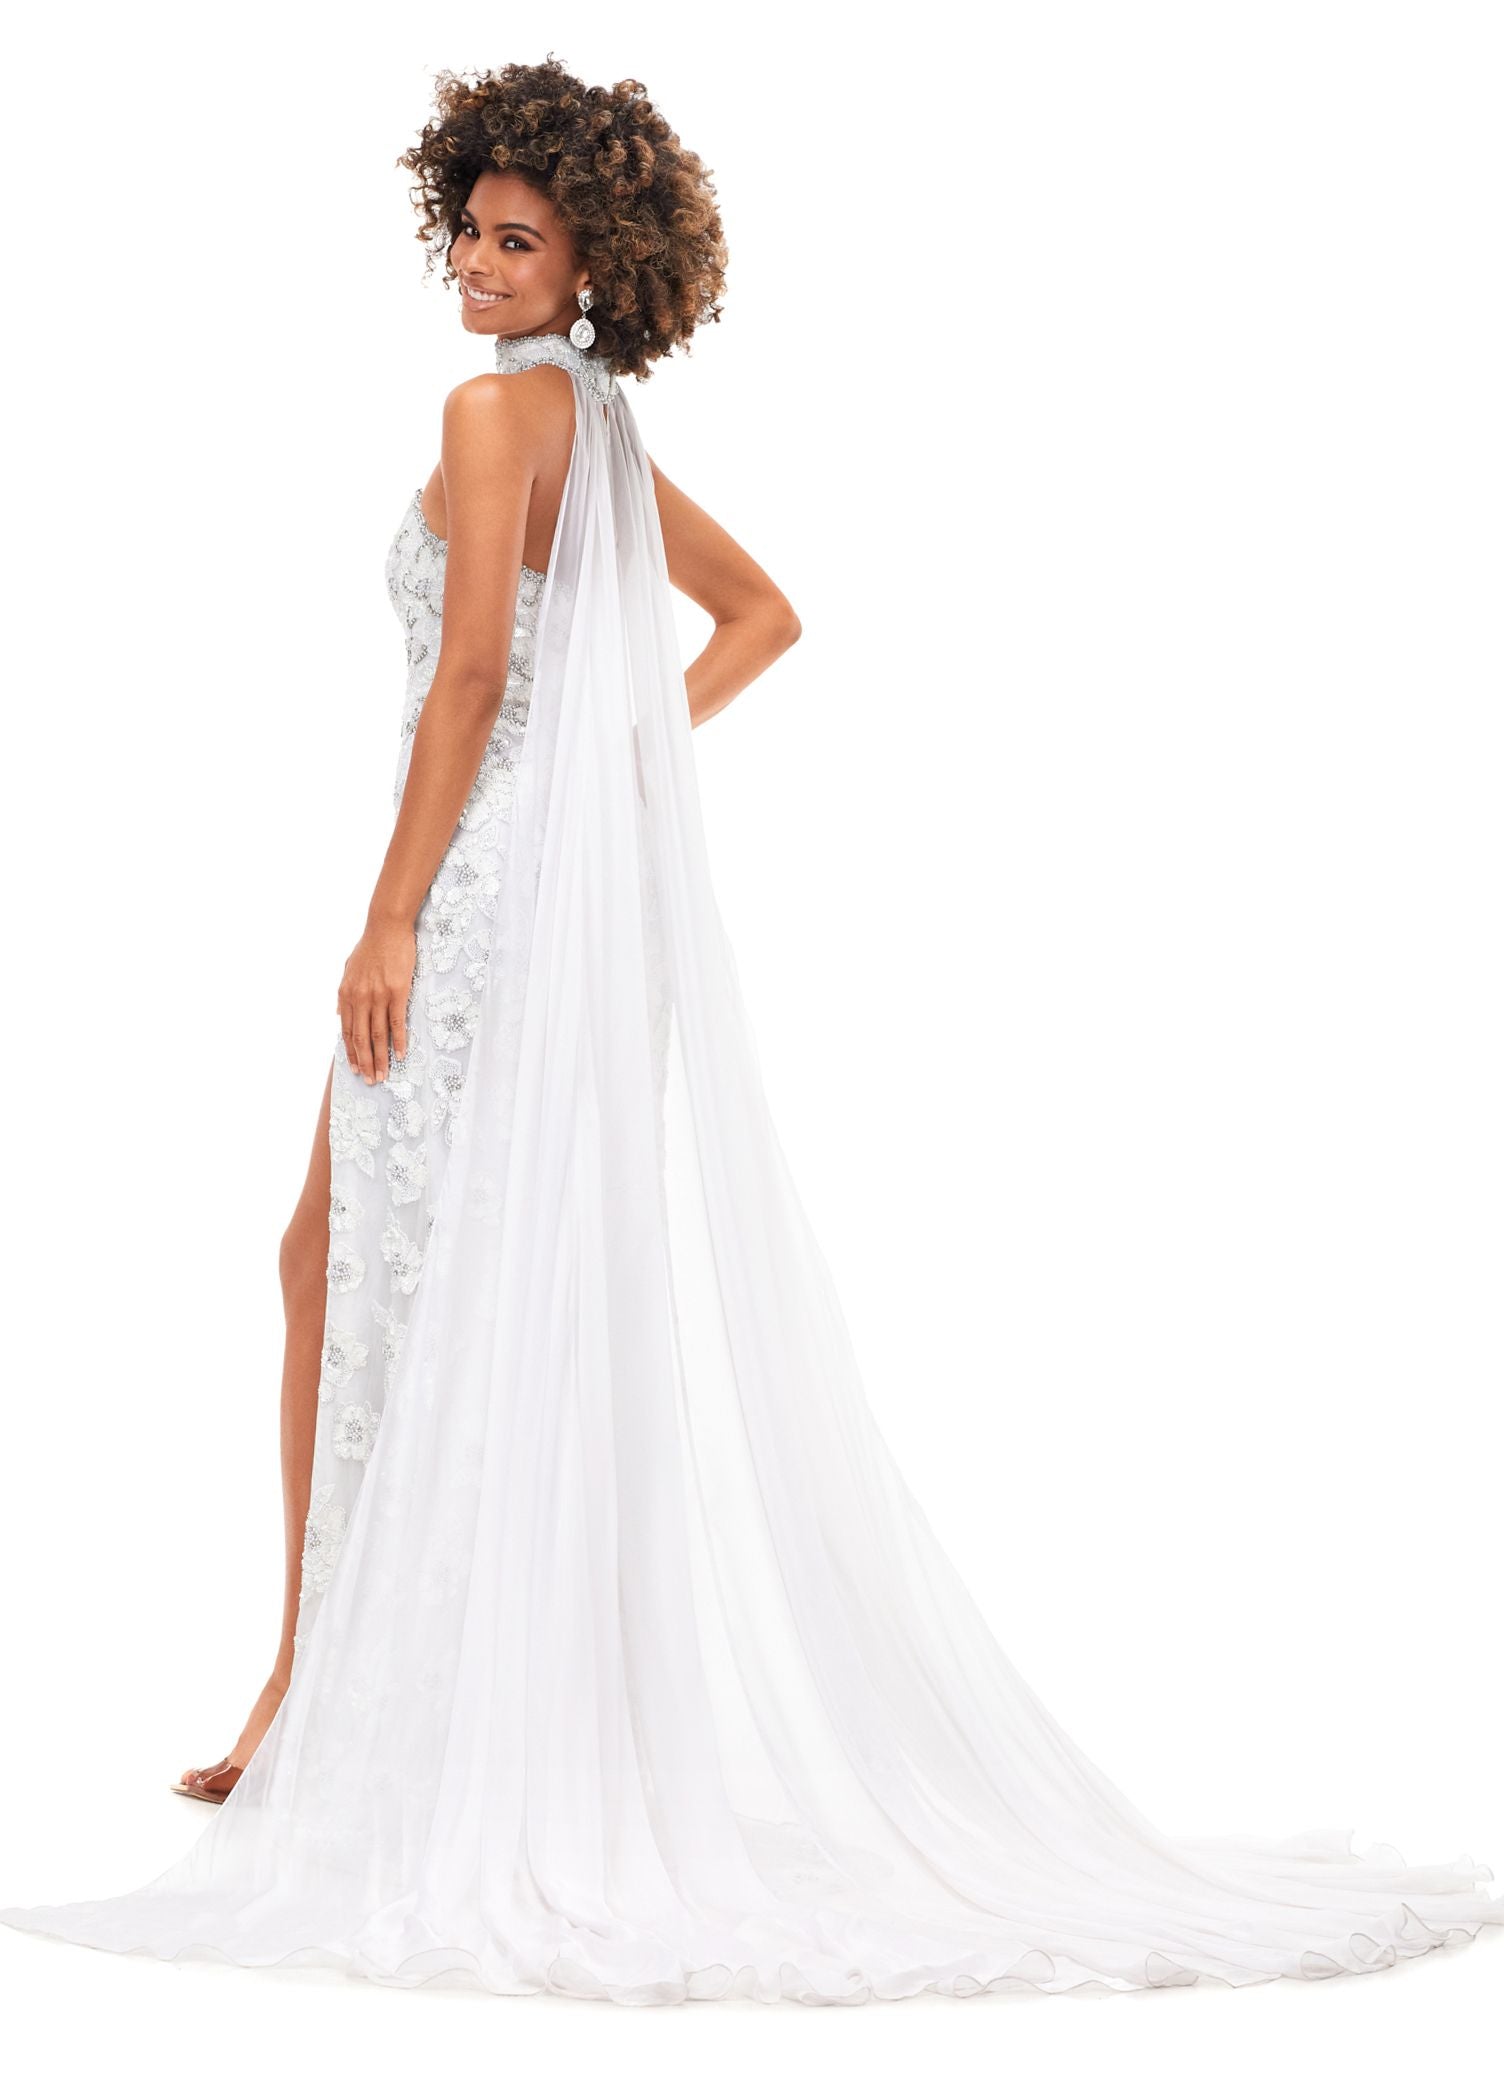 Ashley Lauren 11351 All we can say is WOW! This strapless beaded gown with crystal detailing is sure to make a statement at your next event. The gown features a gorgeous beaded neck choker with attached chiffon cape. Strapless Gown Beaded Choker Chiffon Cape Left Leg Slit COLORS: Royal, Ivory, Red, Neon Pink